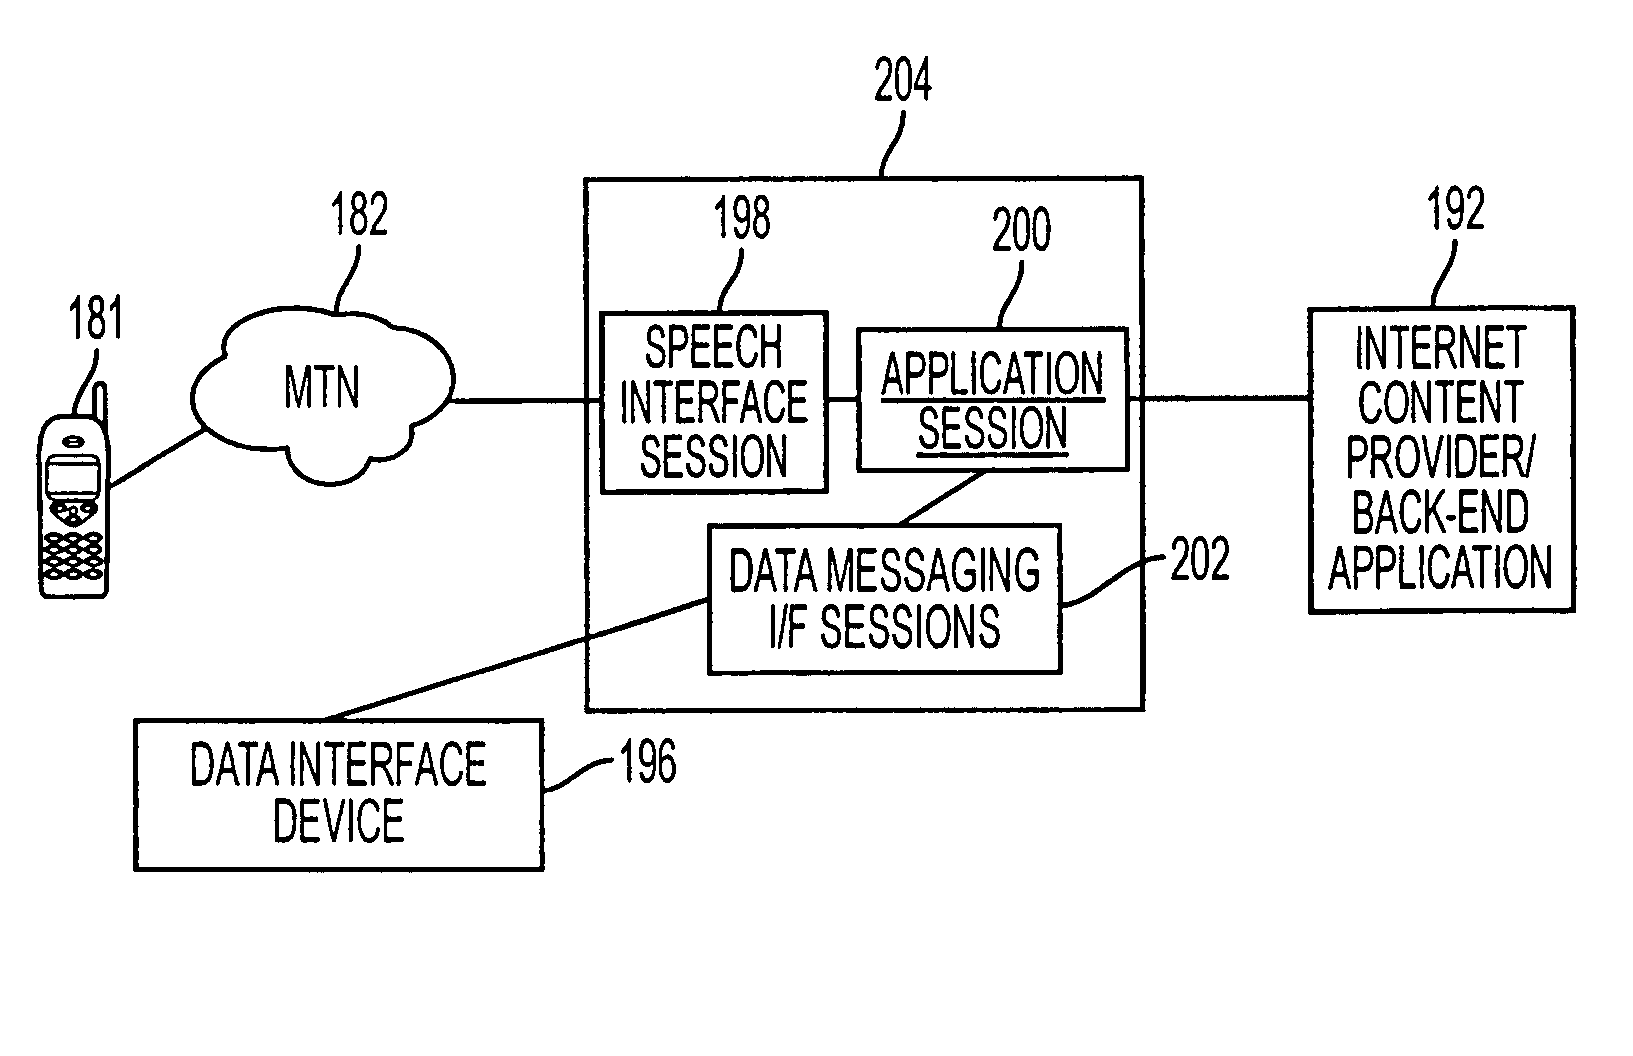 Multi-modal voice-enabled content access and delivery system